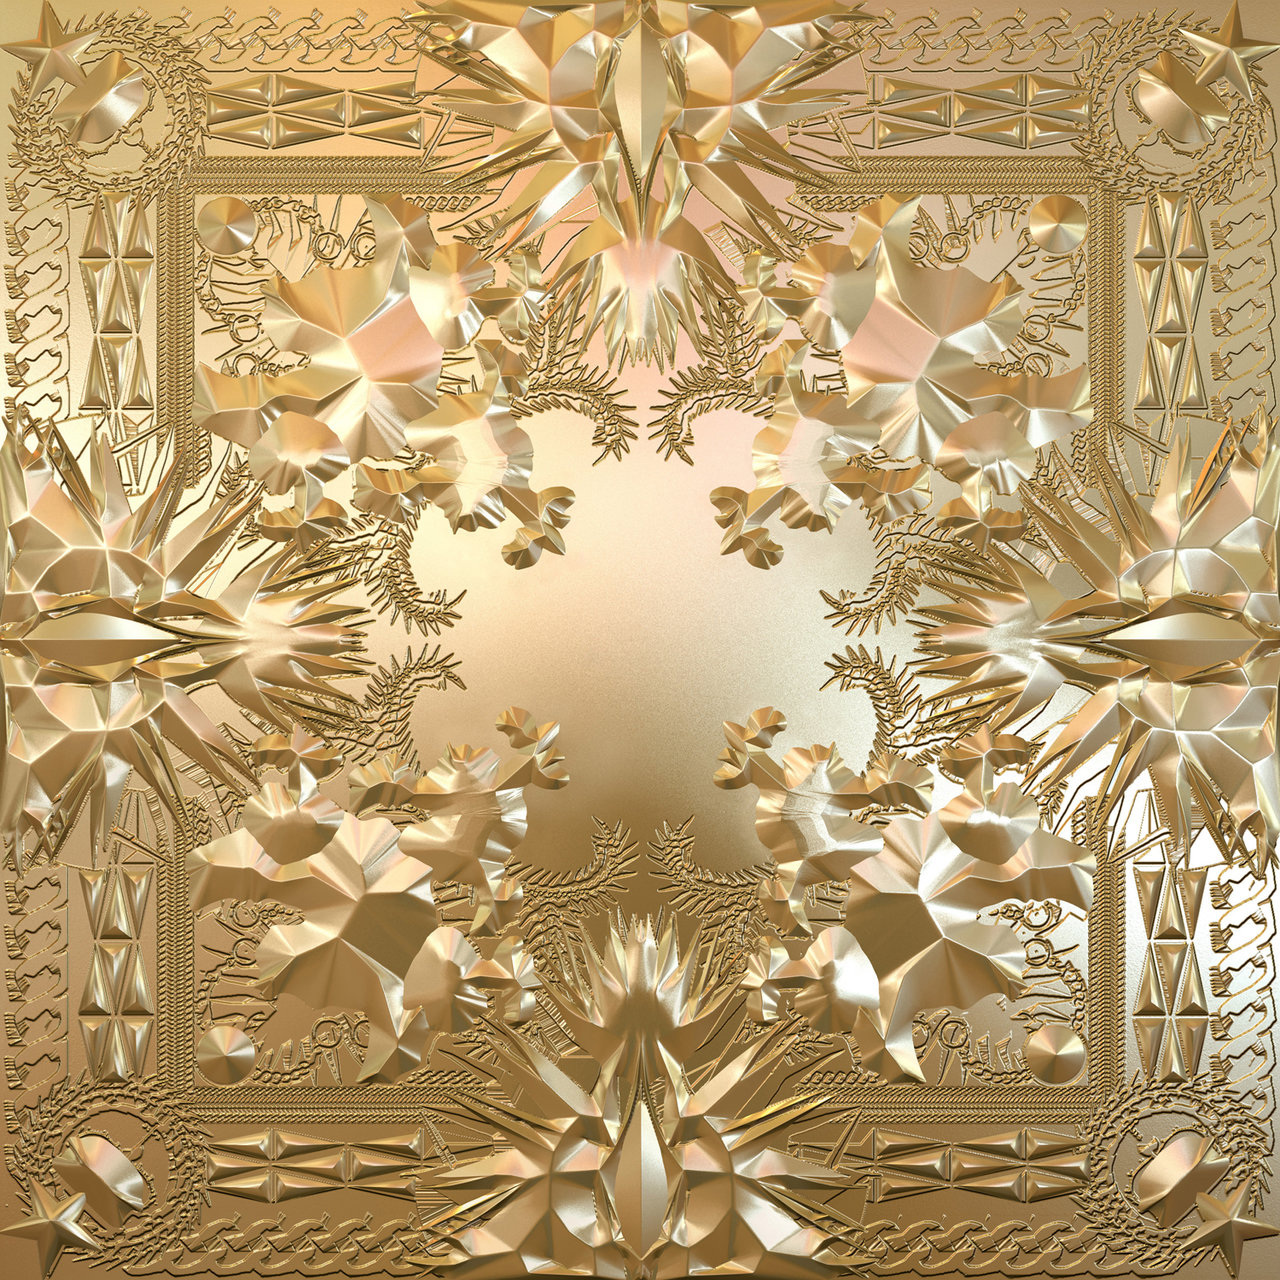 audio review : Watch The Throne ( album ) ... Jay-Z + Kanye West